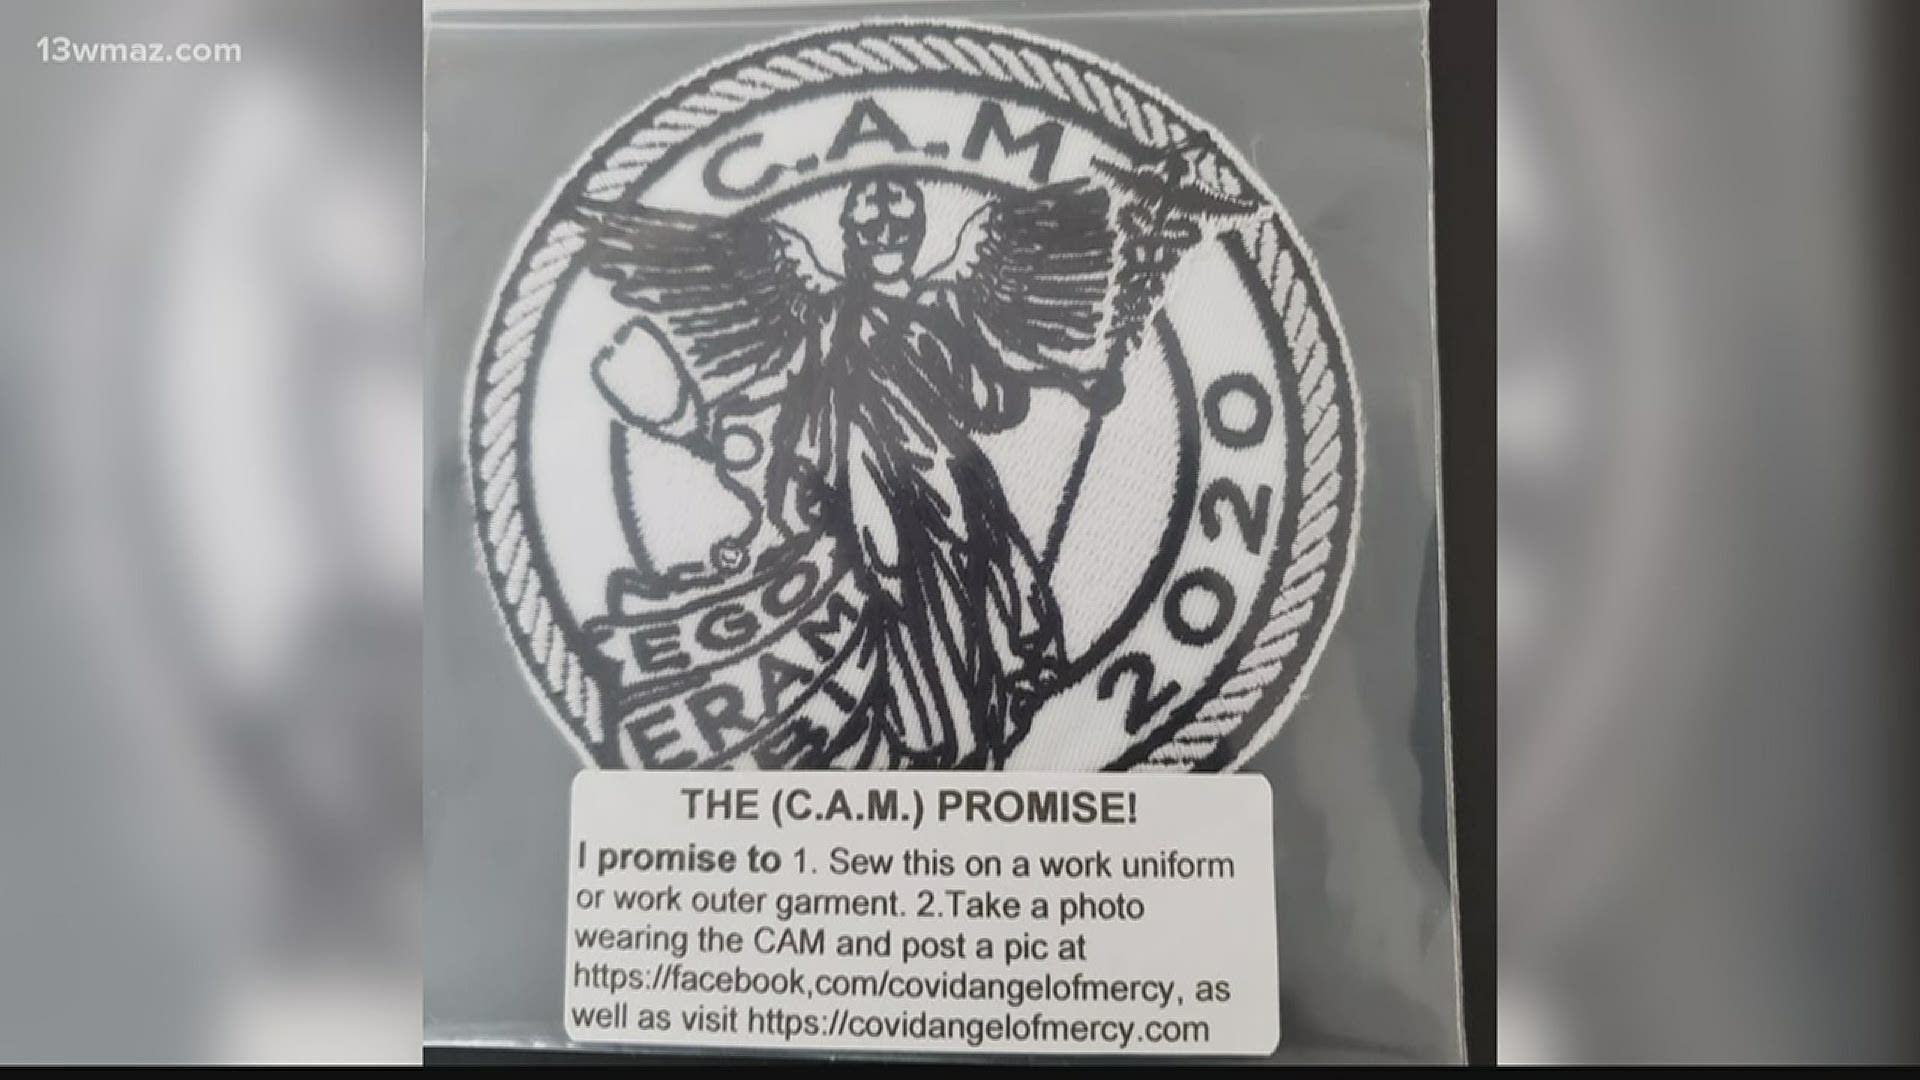 In the military they get combat patches. Jacob Neal thinks folks that are working on the front lines against coronavirus deserve a badge of honor.